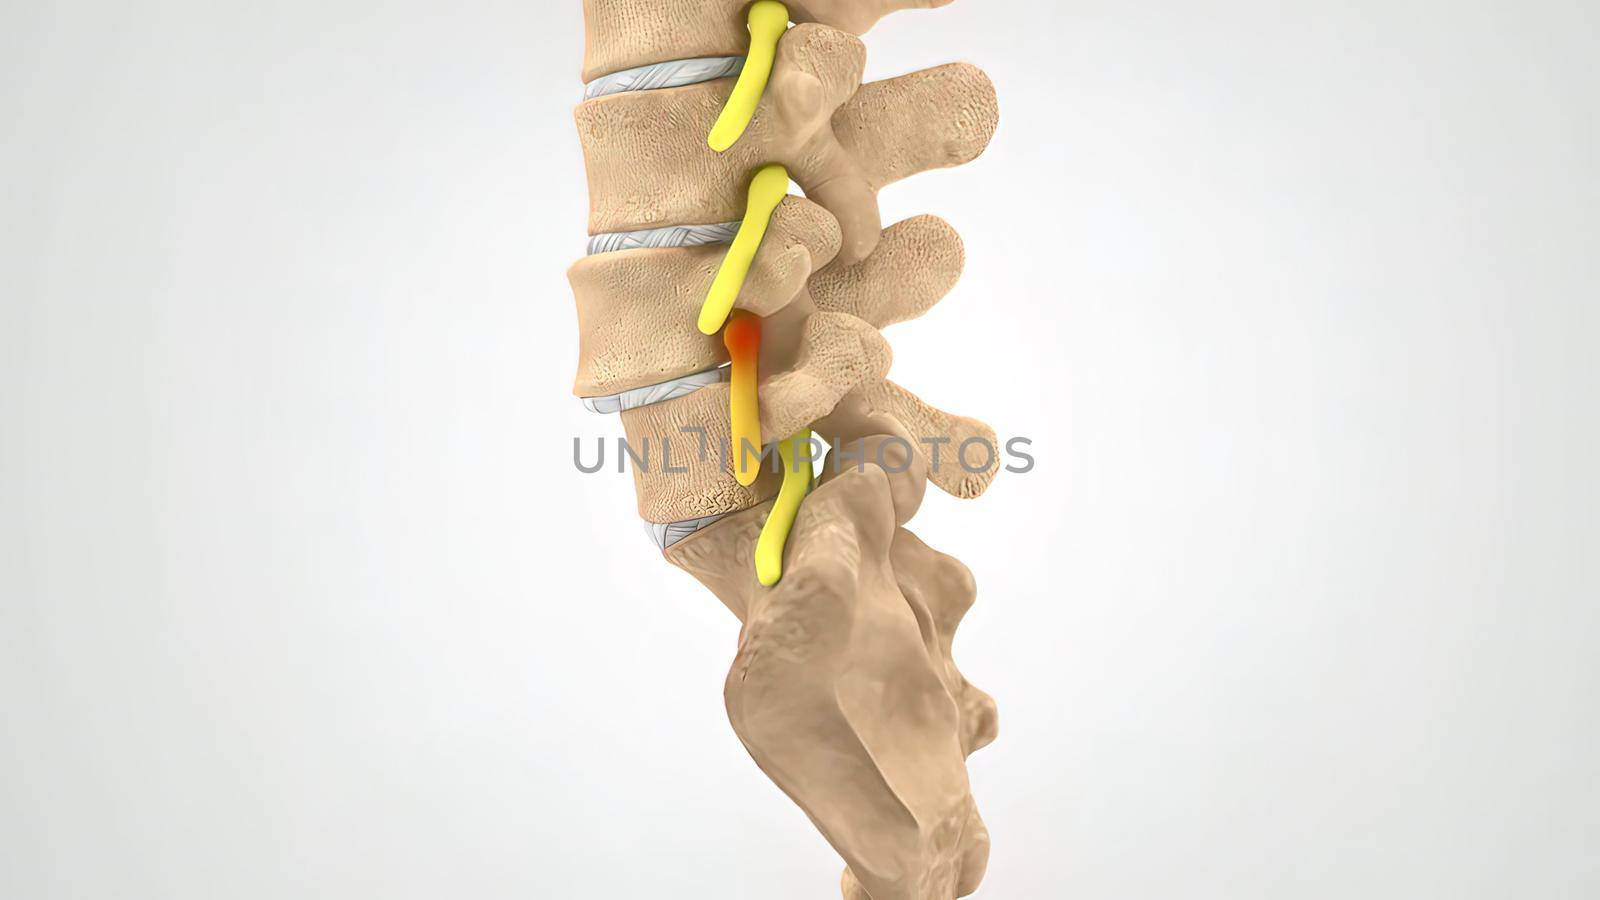 Human spine in details: Vertebra, bone marrow, disc and nerves by creativepic